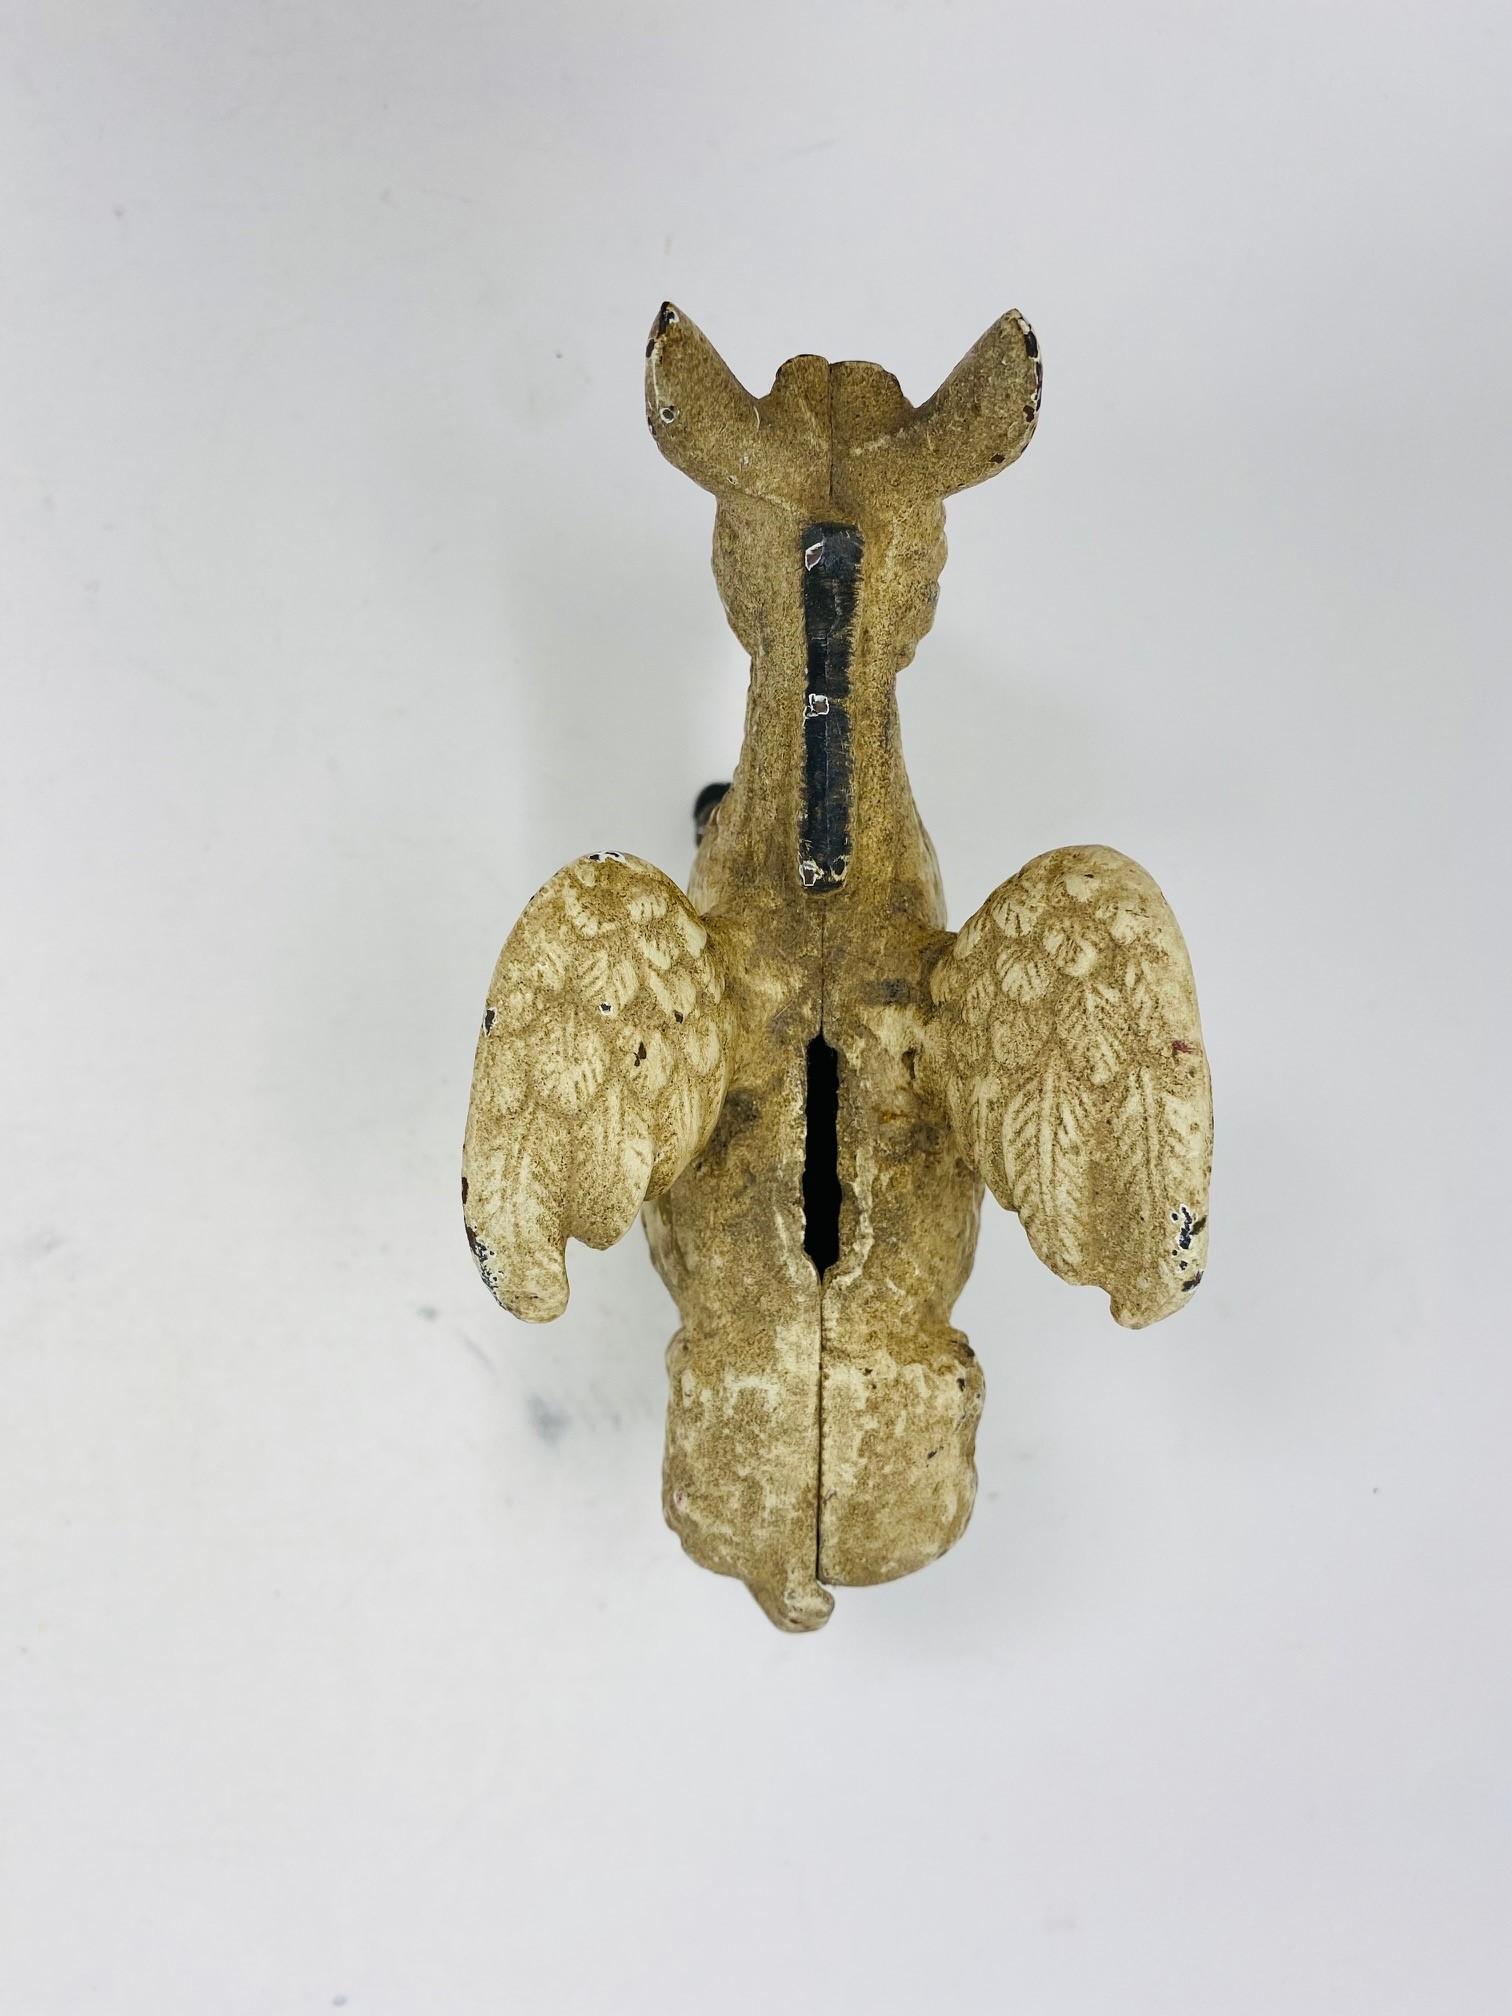 Vintage Cast Iron Donkey with Wings Sculpture by Homart 1